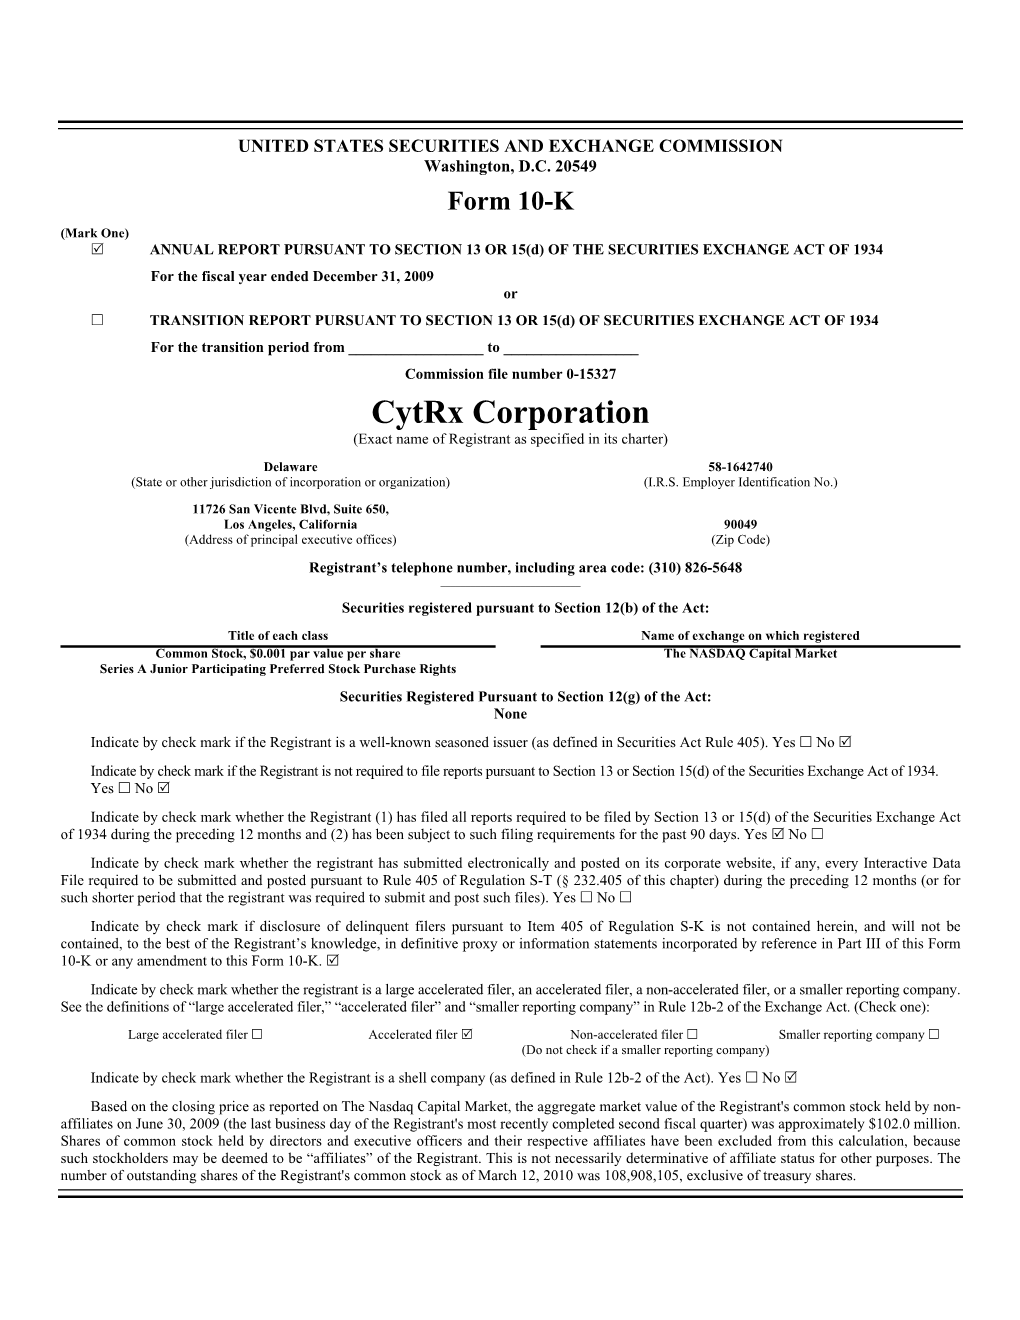 Cytrx Corporation (Exact Name of Registrant As Specified in Its Charter)